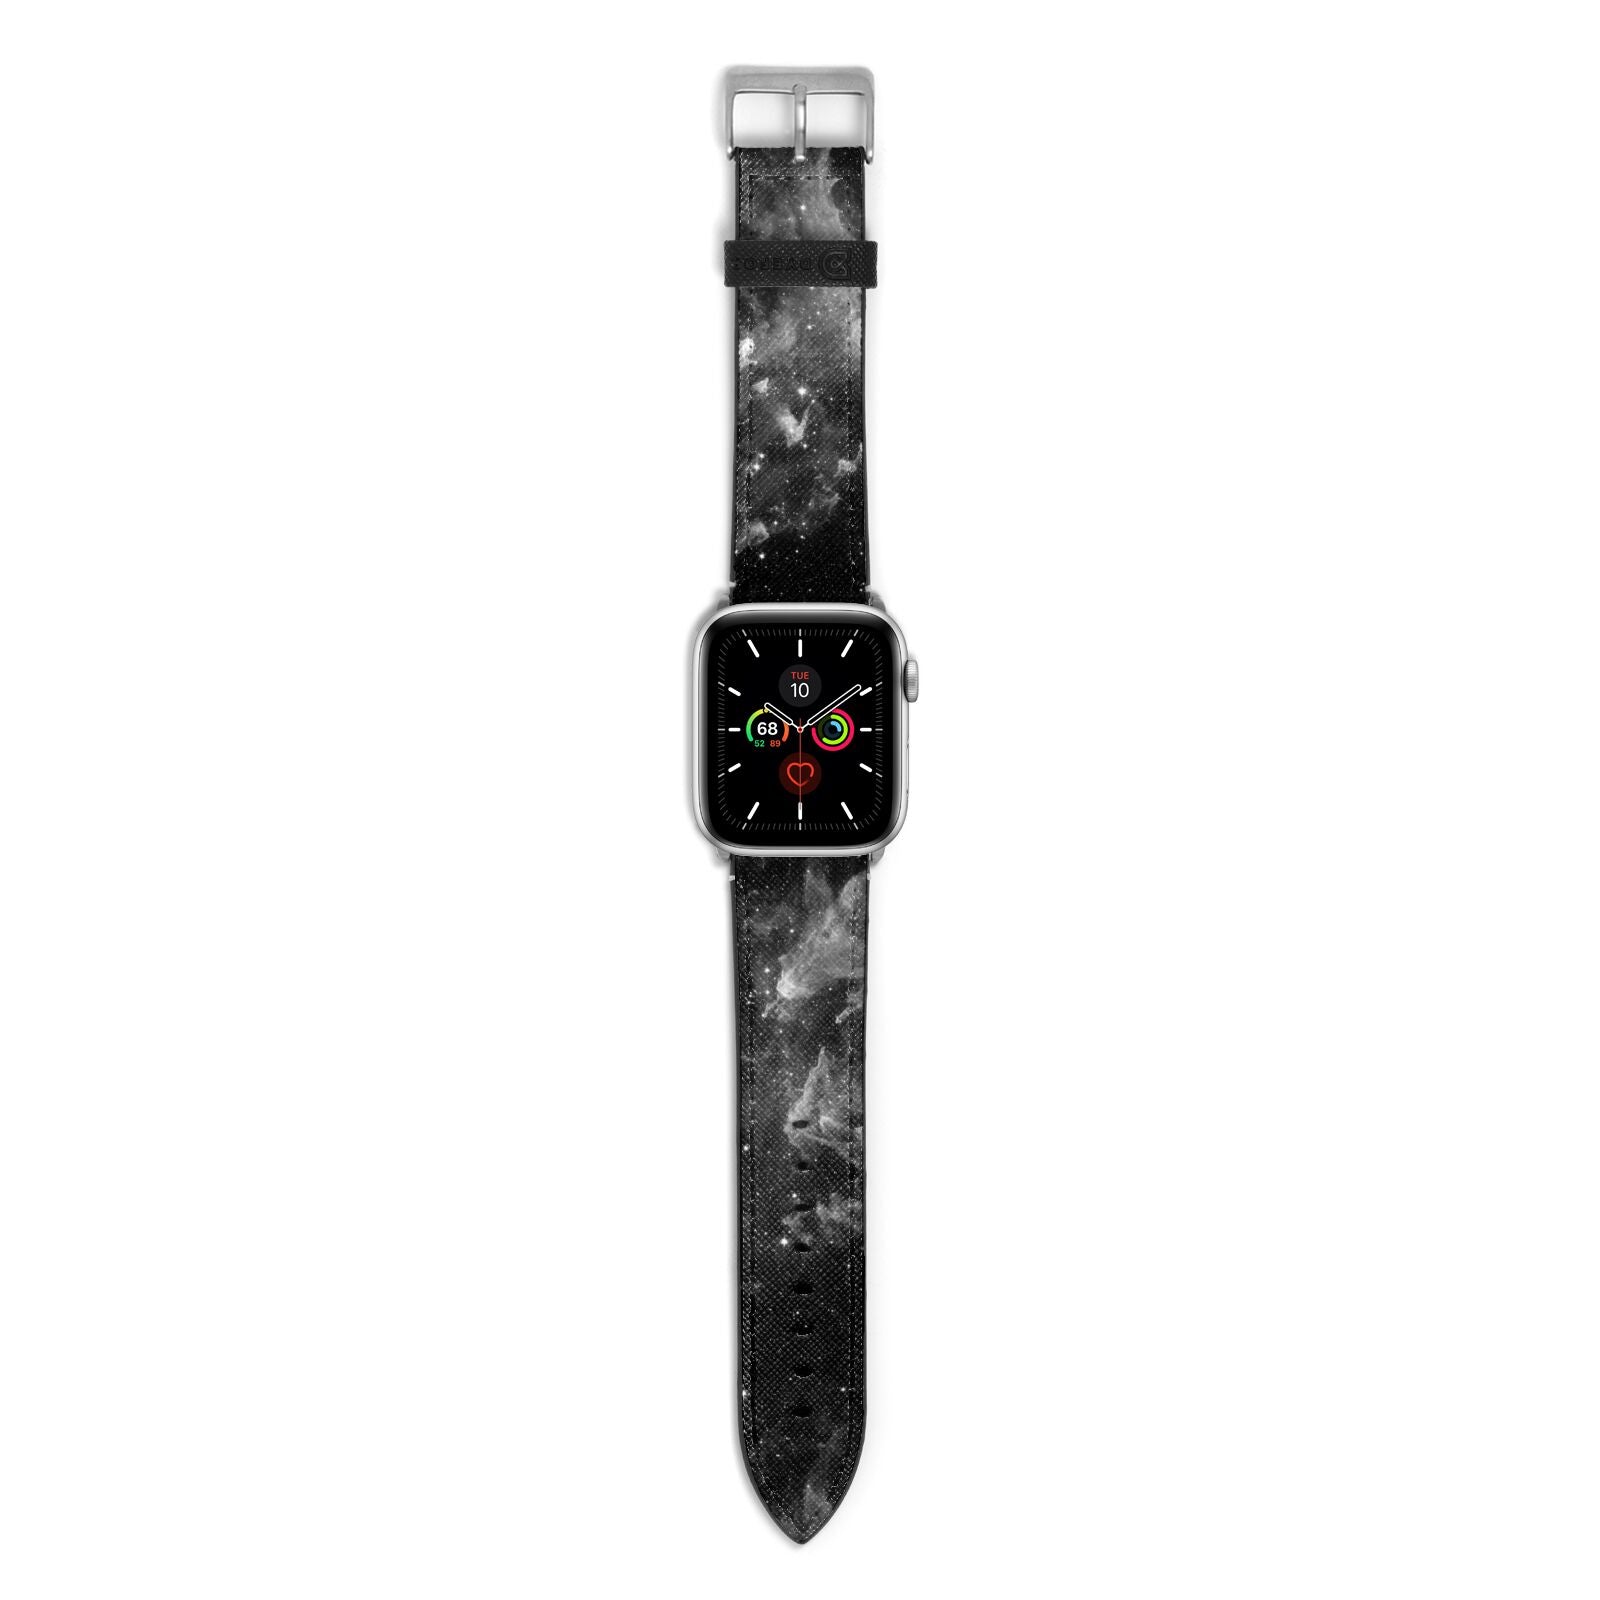 Black Space Apple Watch Strap with Silver Hardware